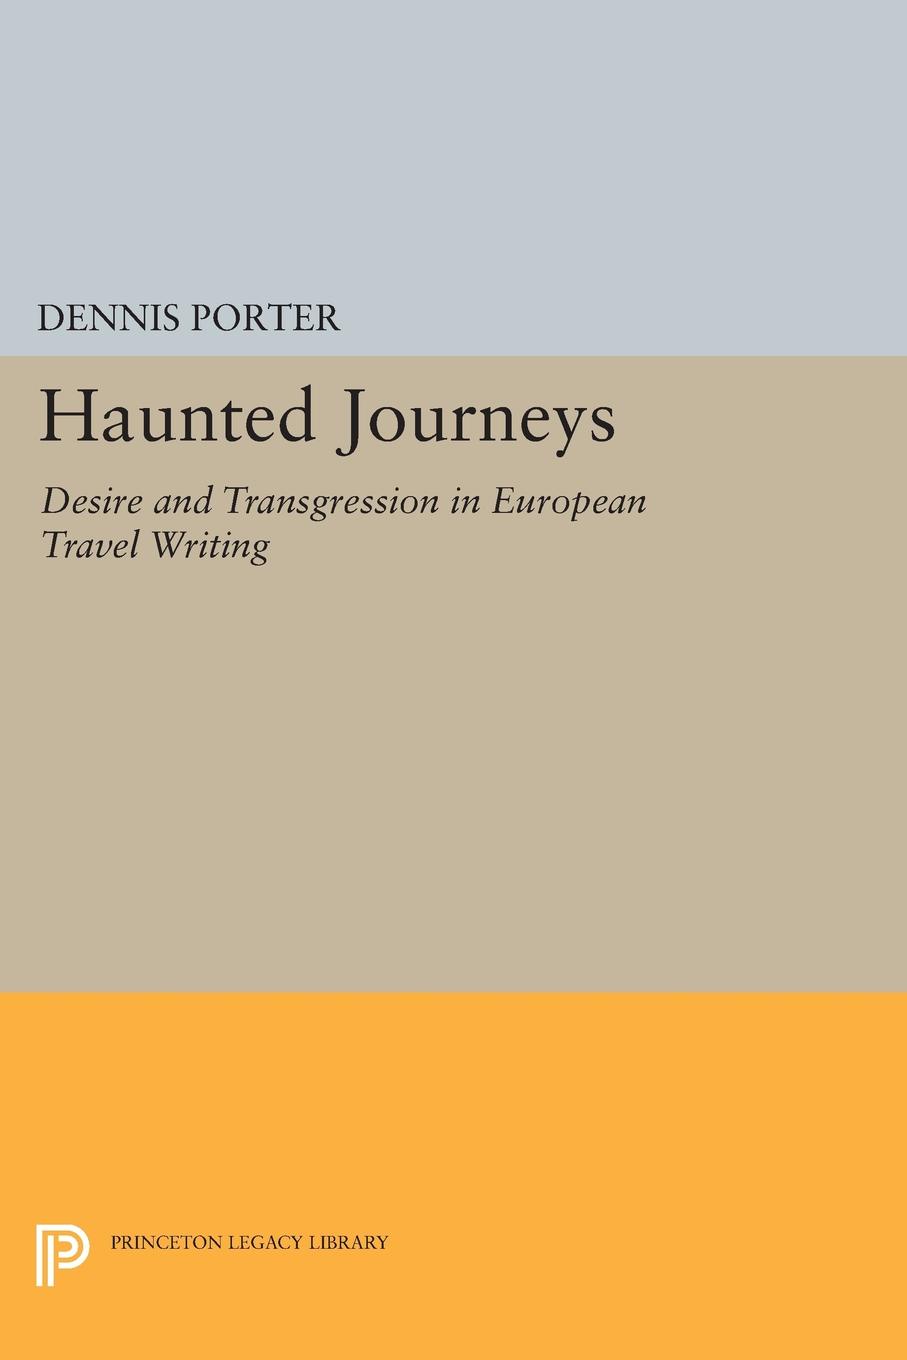 Haunted Journeys. Desire and Transgression in European Travel Writing